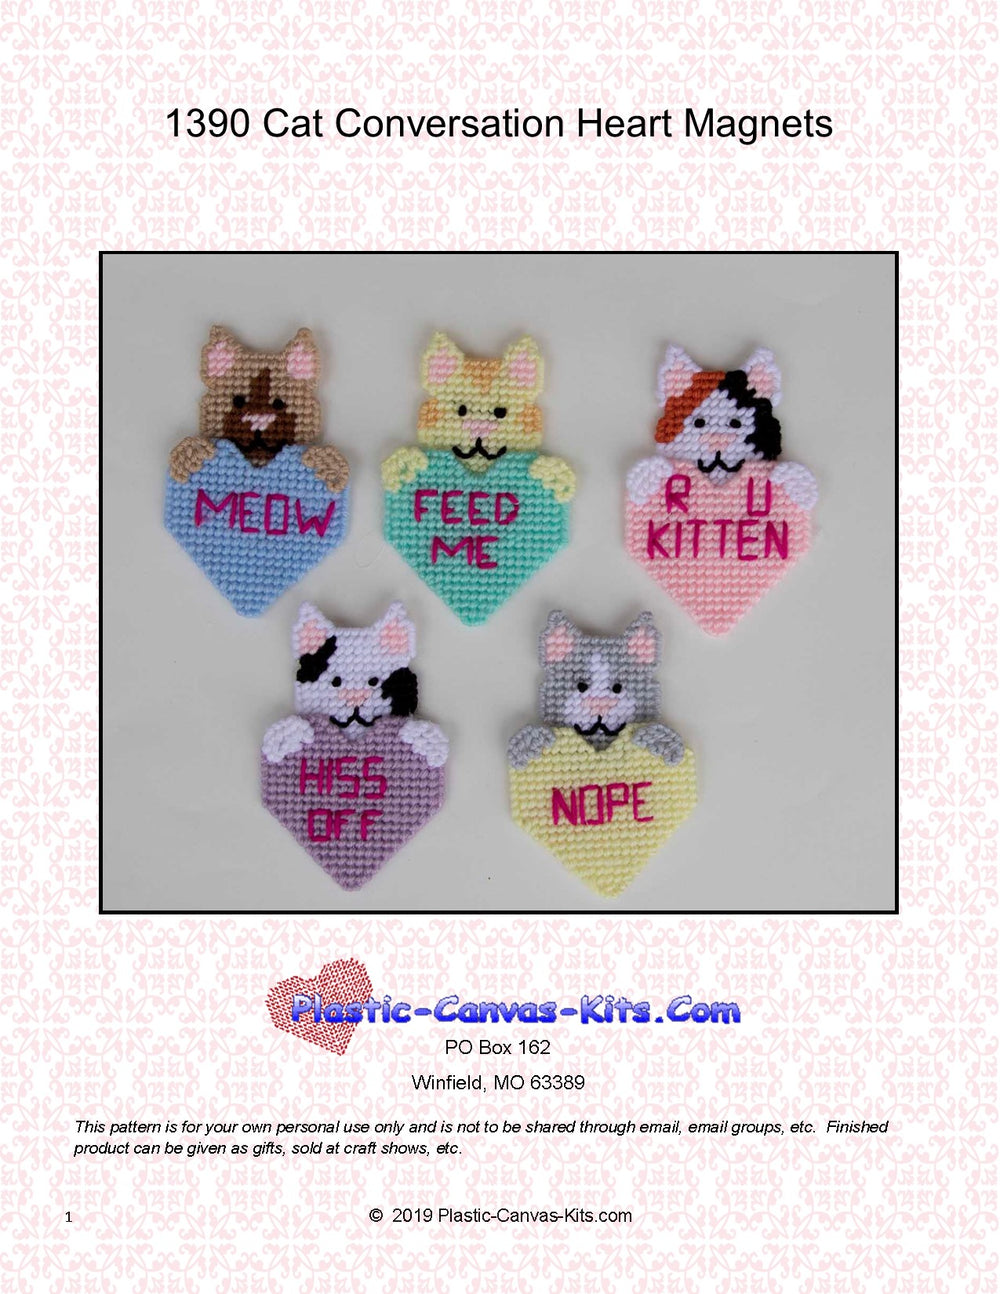 Cats and Valentine's Day Conversation Hearts Magnets